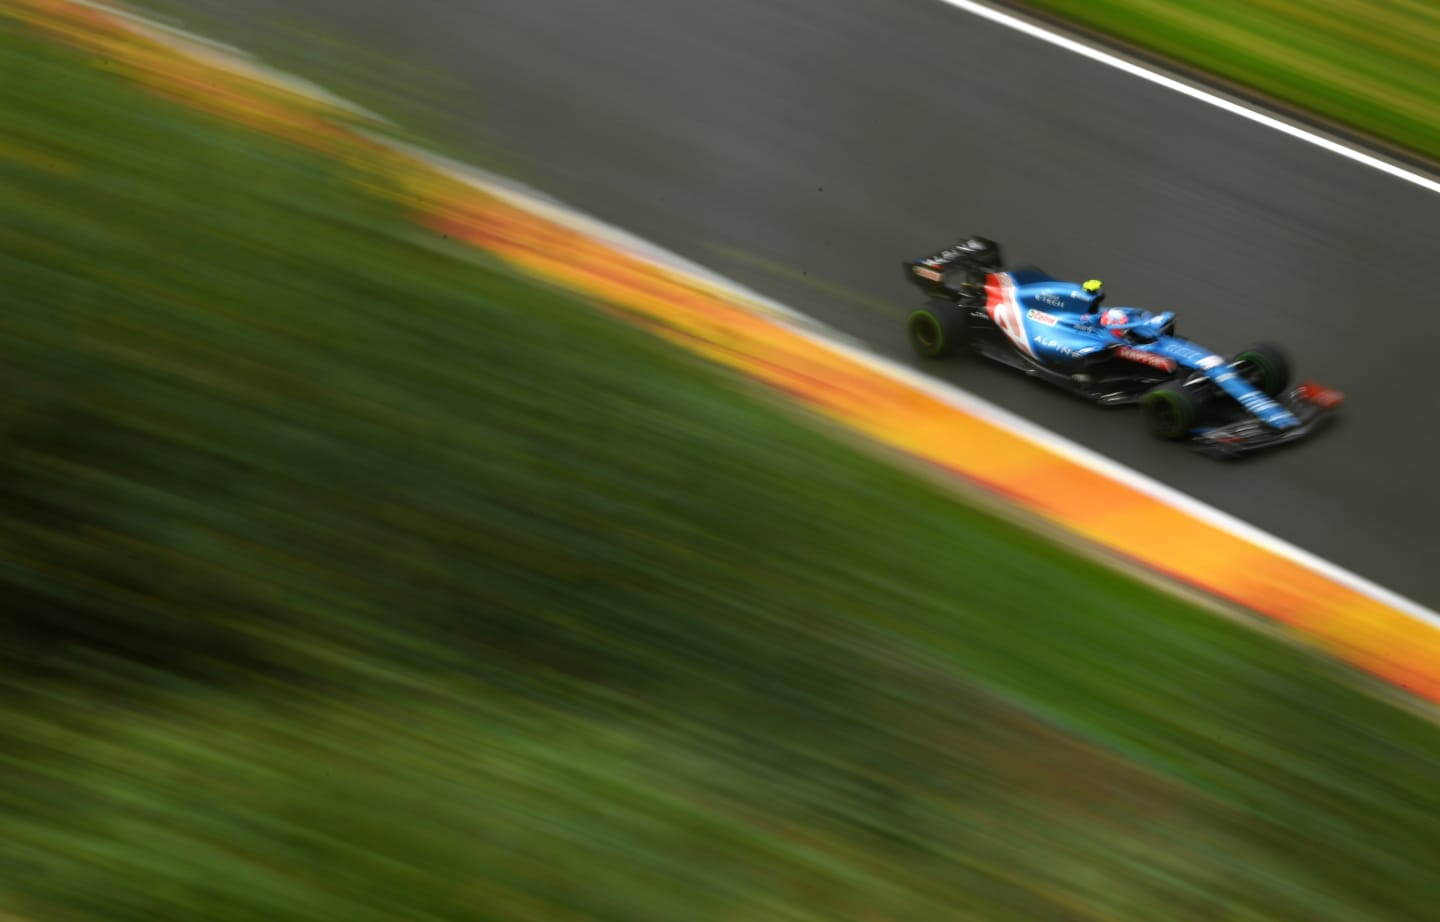 SPA, BELGIUM - AUGUST 28: Esteban Ocon of France driving the (31) Alpine A521 Renault during qualifying ahead of the F1 Grand Prix of Belgium at Circuit de Spa-Francorchamps on August 28, 2021 in Spa, Belgium. (Photo by Dan Mullan/Getty Images)